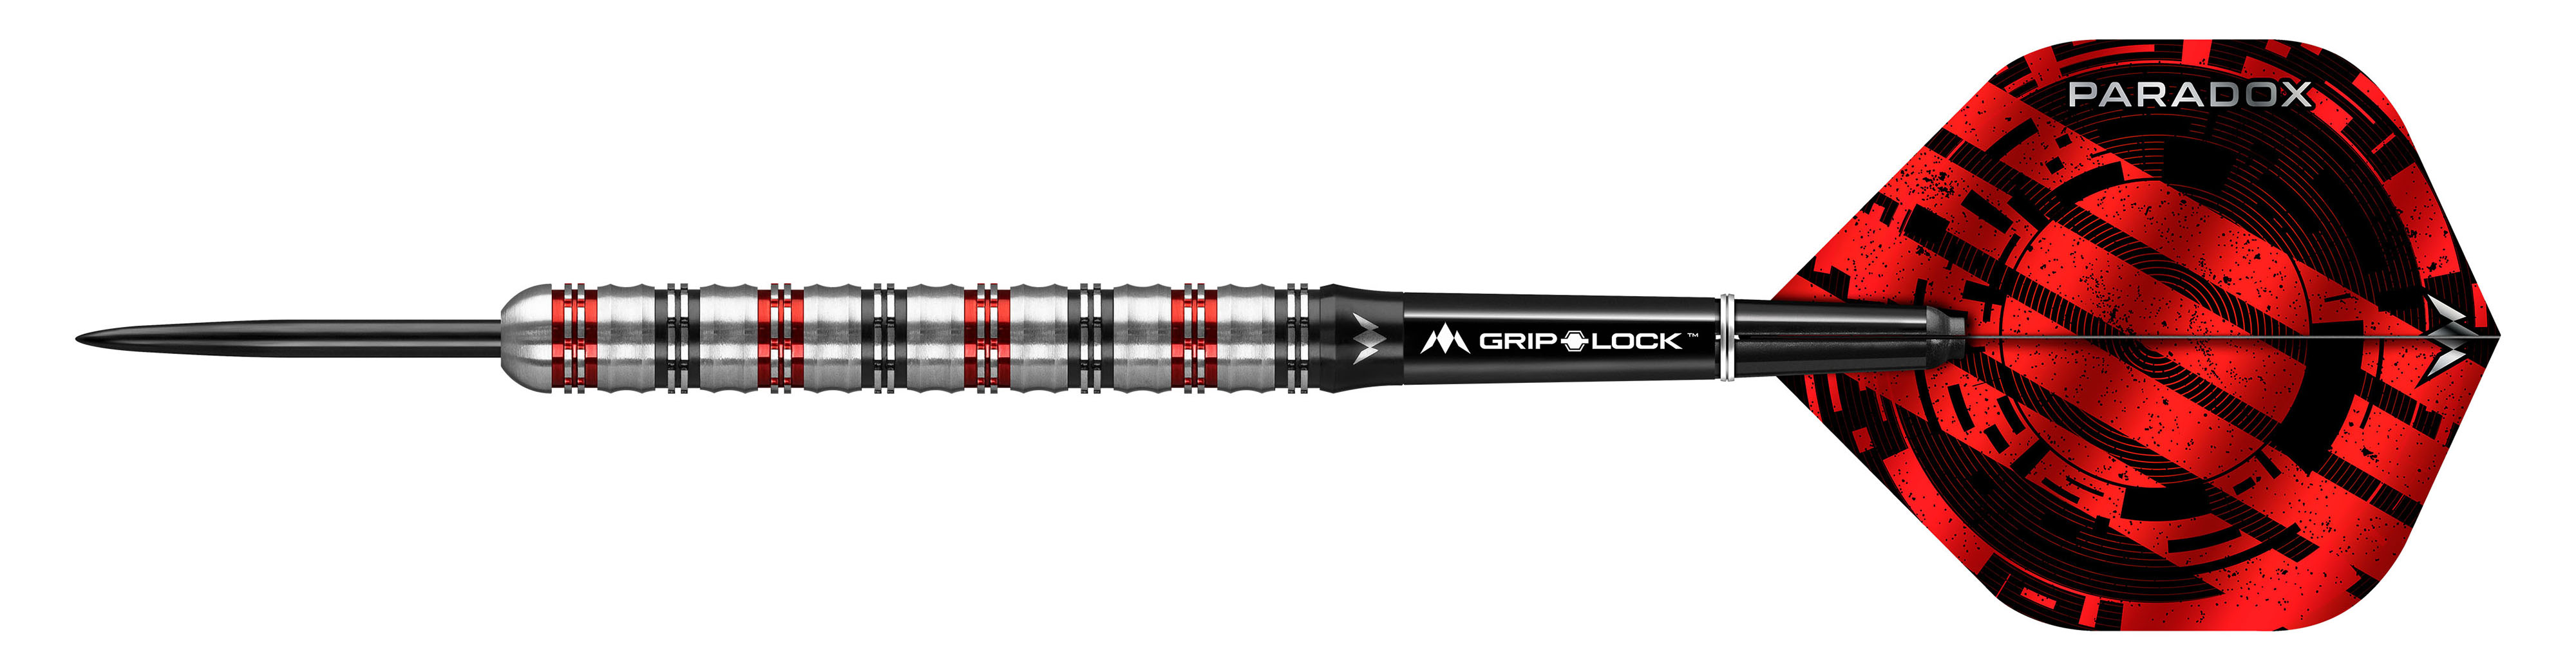 Paradox M1 Mission Steel Tipped Darts - Left